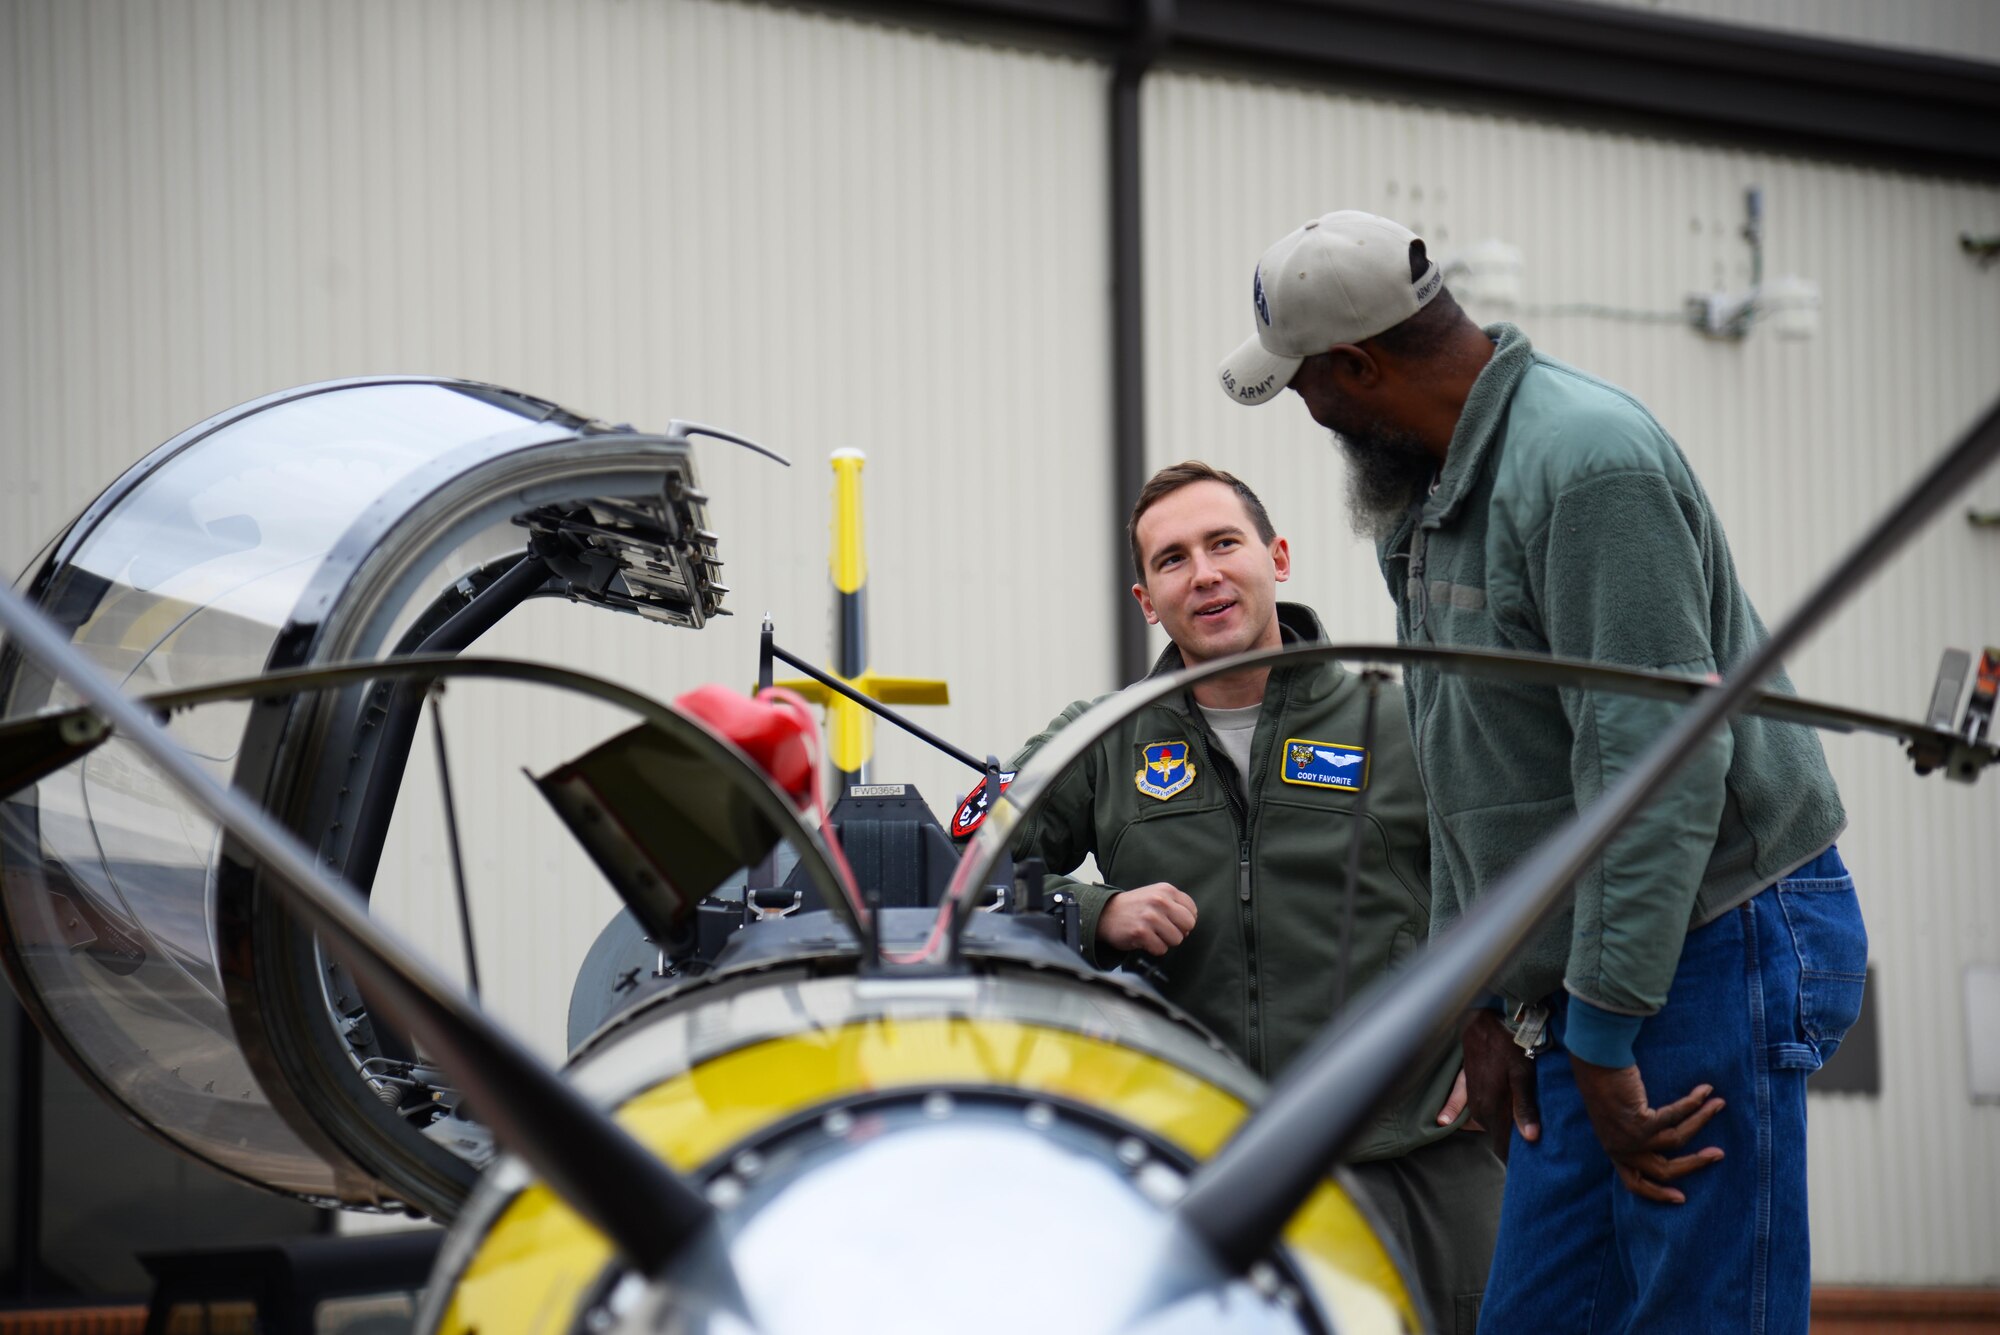 First Lt. Cody Favorite, 37th Flying Training Squadron instructor pilot, shows a retiree guest the inner workings of a T-6 Texan II, Nov. 14, 2019, on Columbus Air Force Base, Miss. The day aligned with November’s theme of military family appreciation and allowed Columbus AFB to show its gratitude for the retiree community. (U.S. Air Force photo by Airman 1st Class Jake Jacobsen)